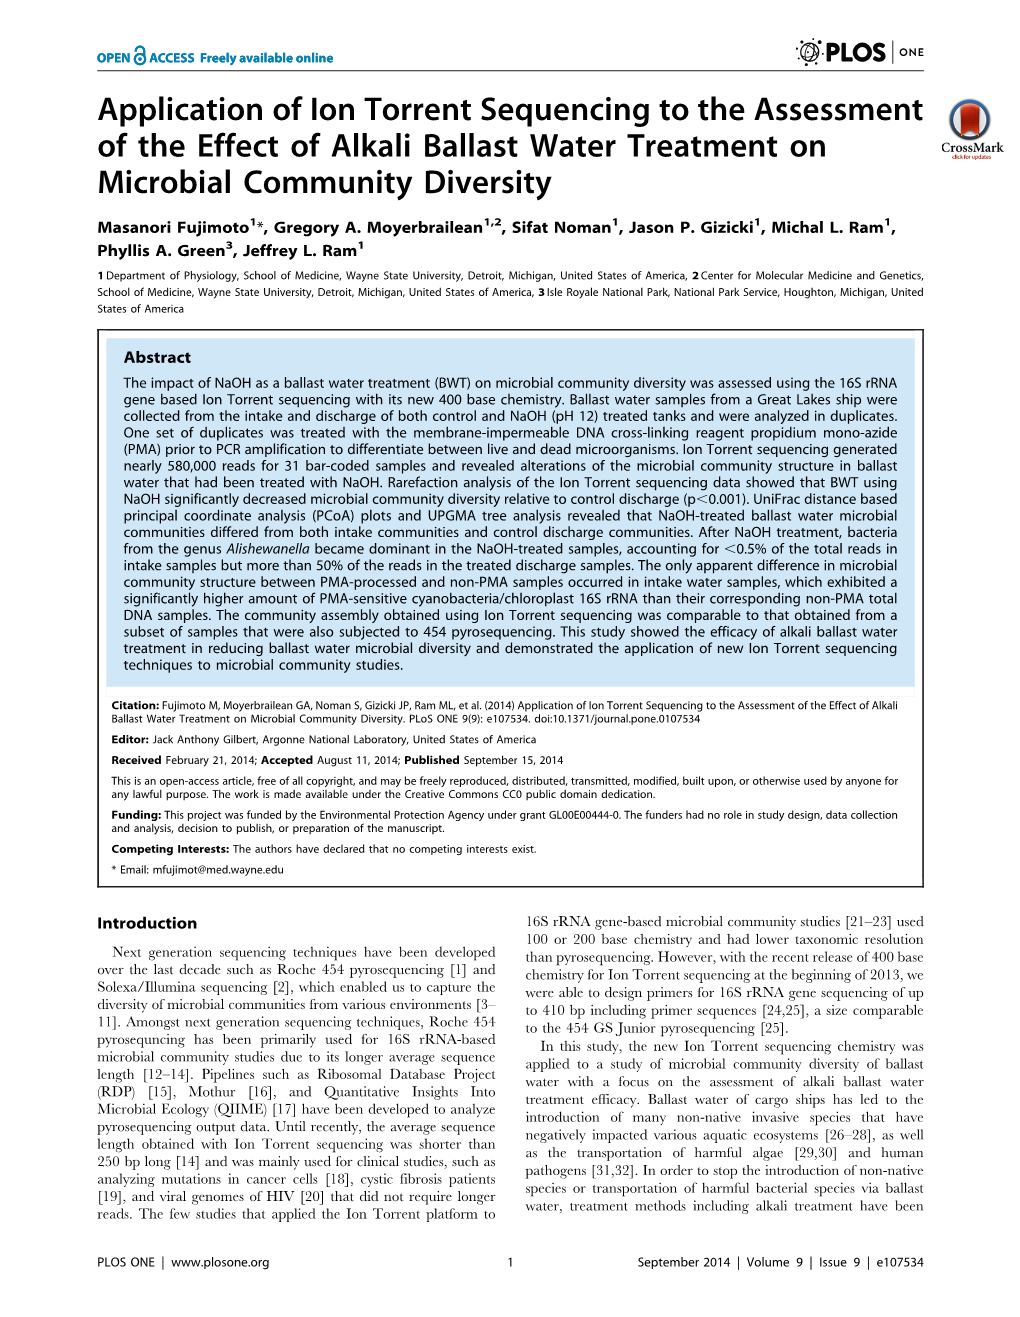 Application of Ion Torrent Sequencing to the Assessment of the Effect of Alkali Ballast Water Treatment on Microbial Community Diversity